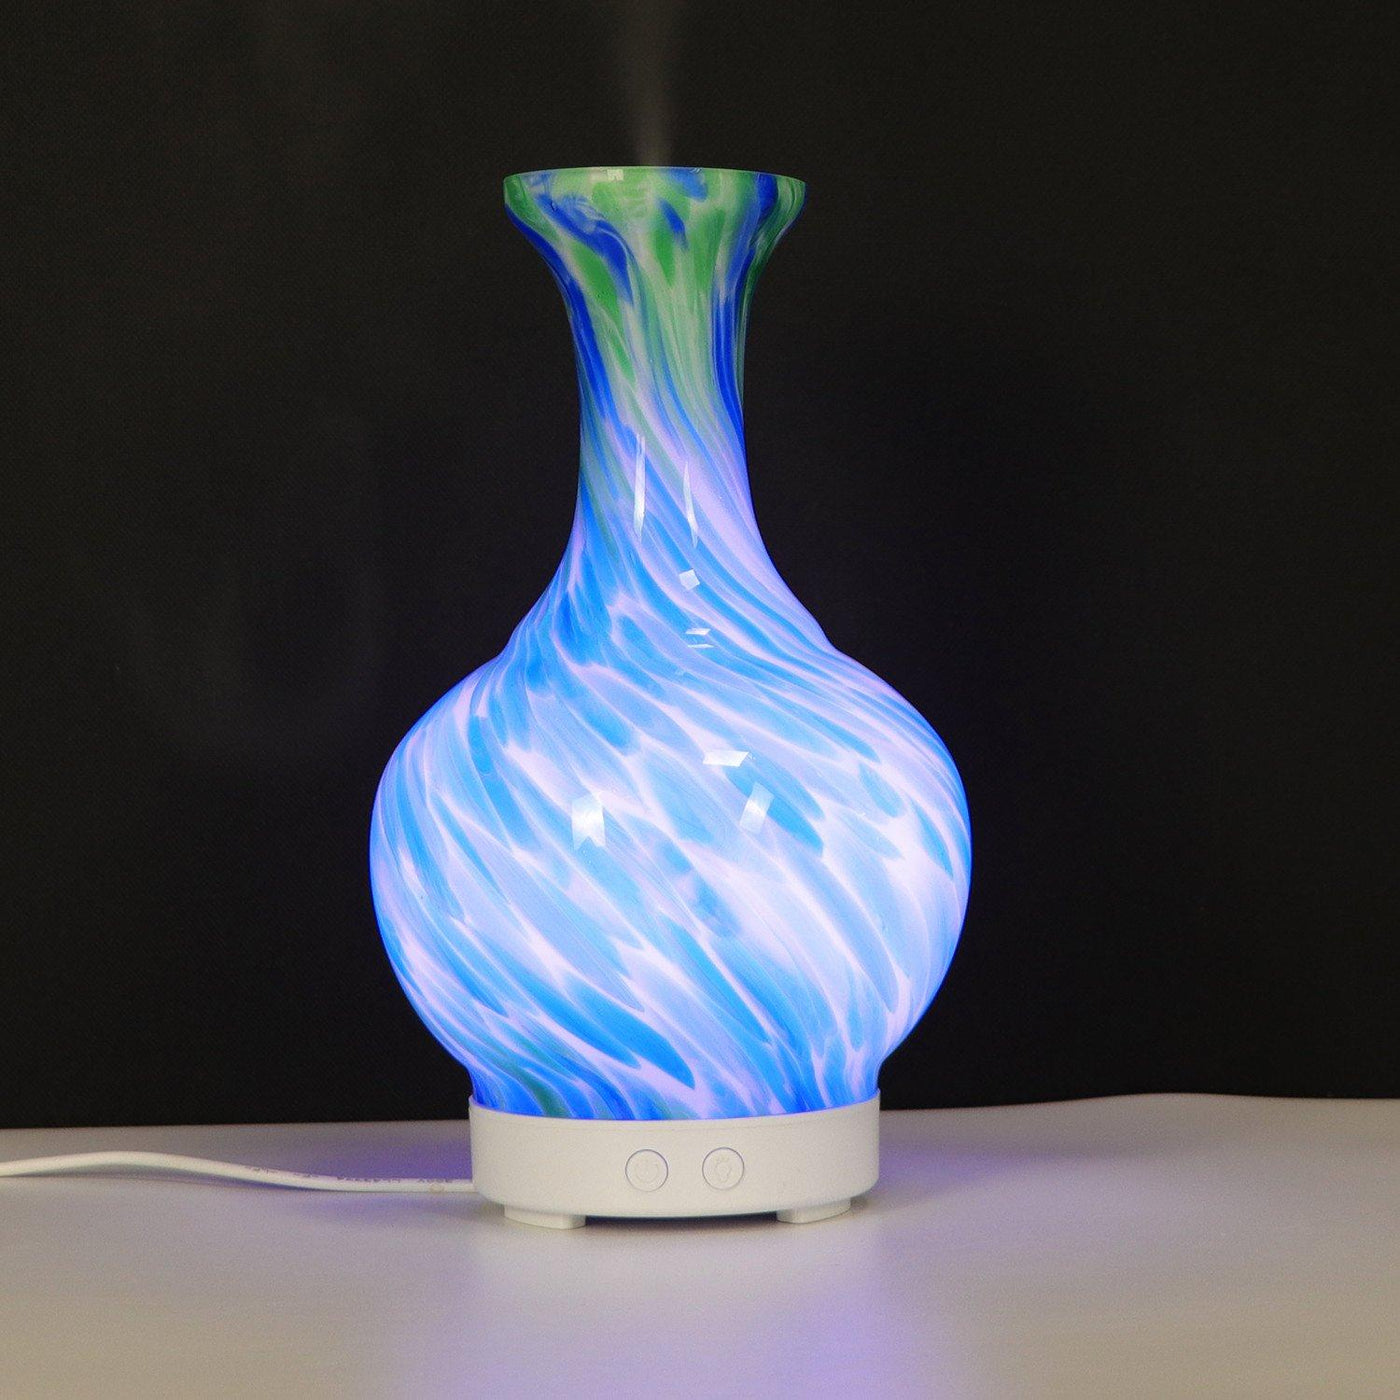 Aroma Glass Vase Light Up Aroma Diffuser In Blue Green.